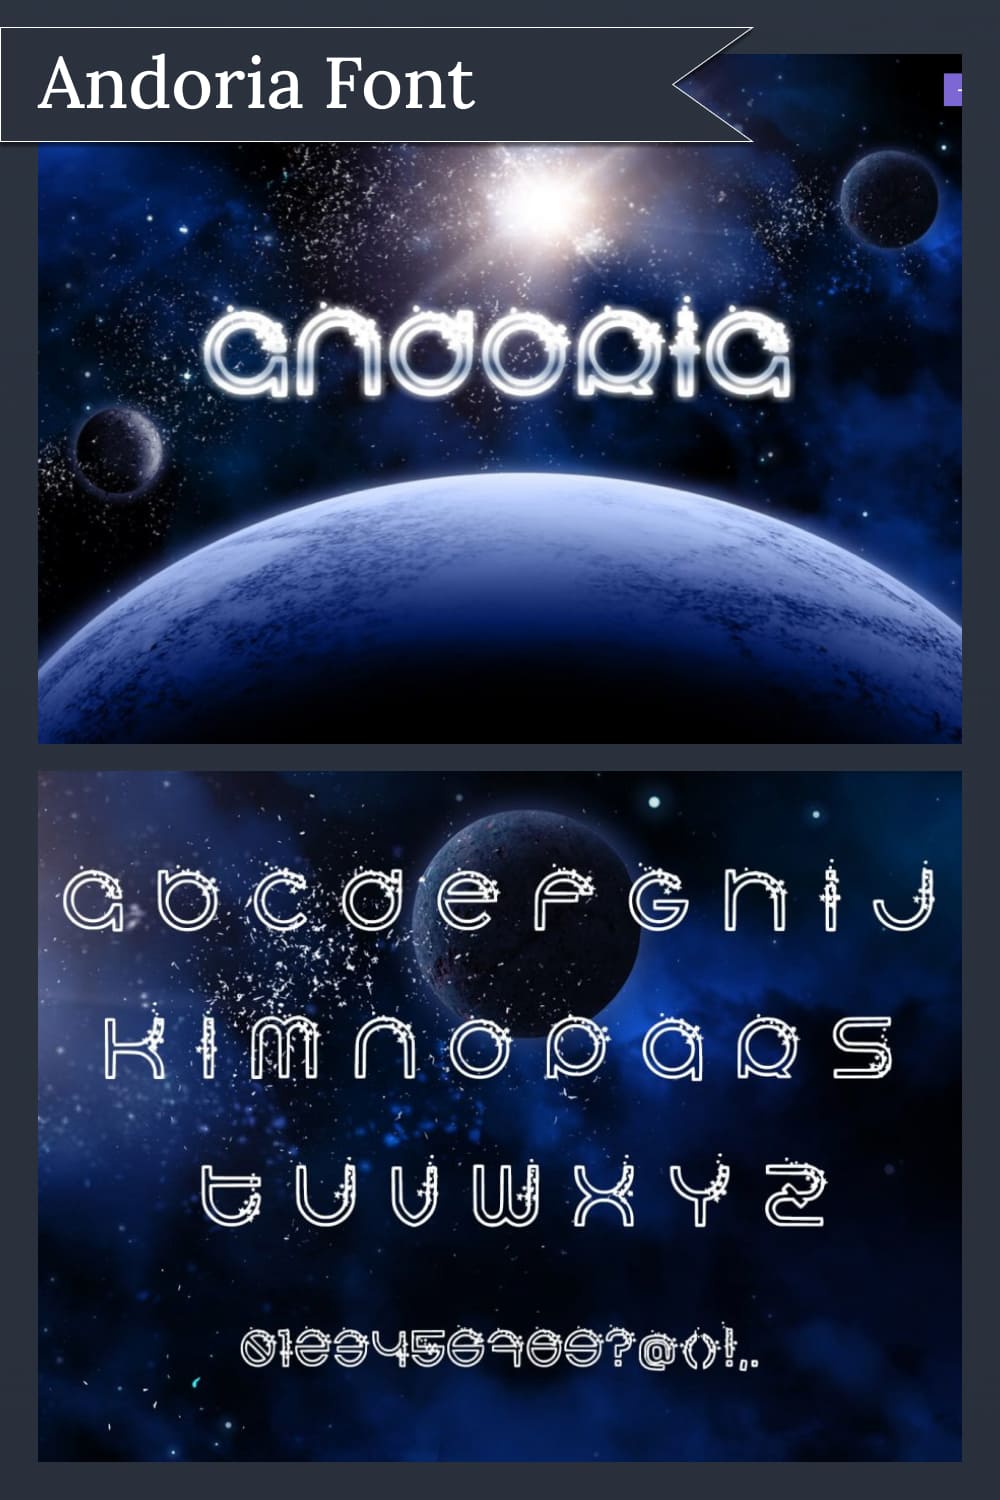 Futuristic font style on a space background.